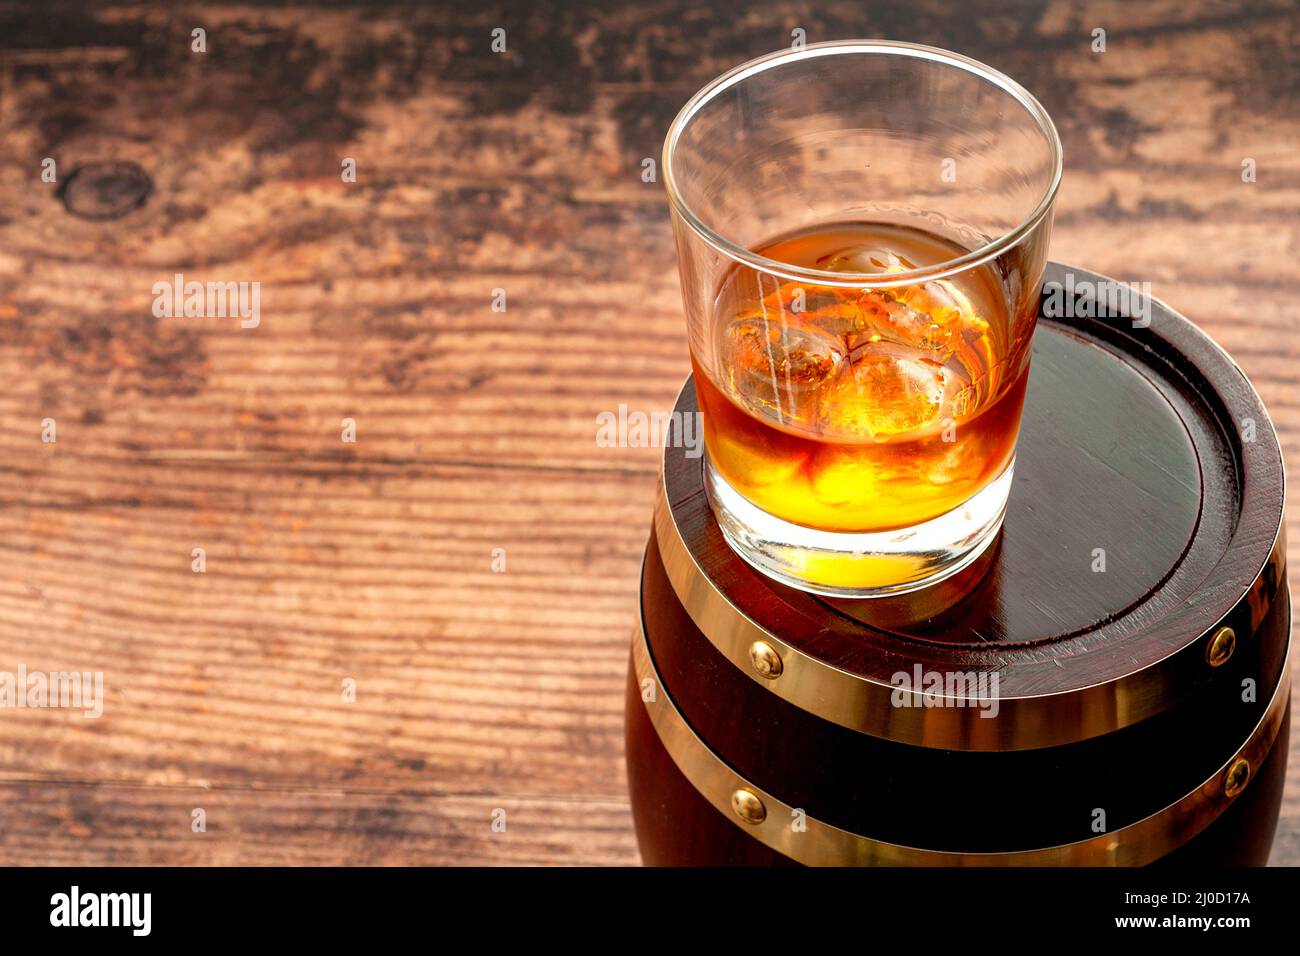 Strong spirit, masculine or macho lifestyle and whisky distillery concept with glass of good bourbon on the rocks and oak barrel on the cellar wooden Stock Photo